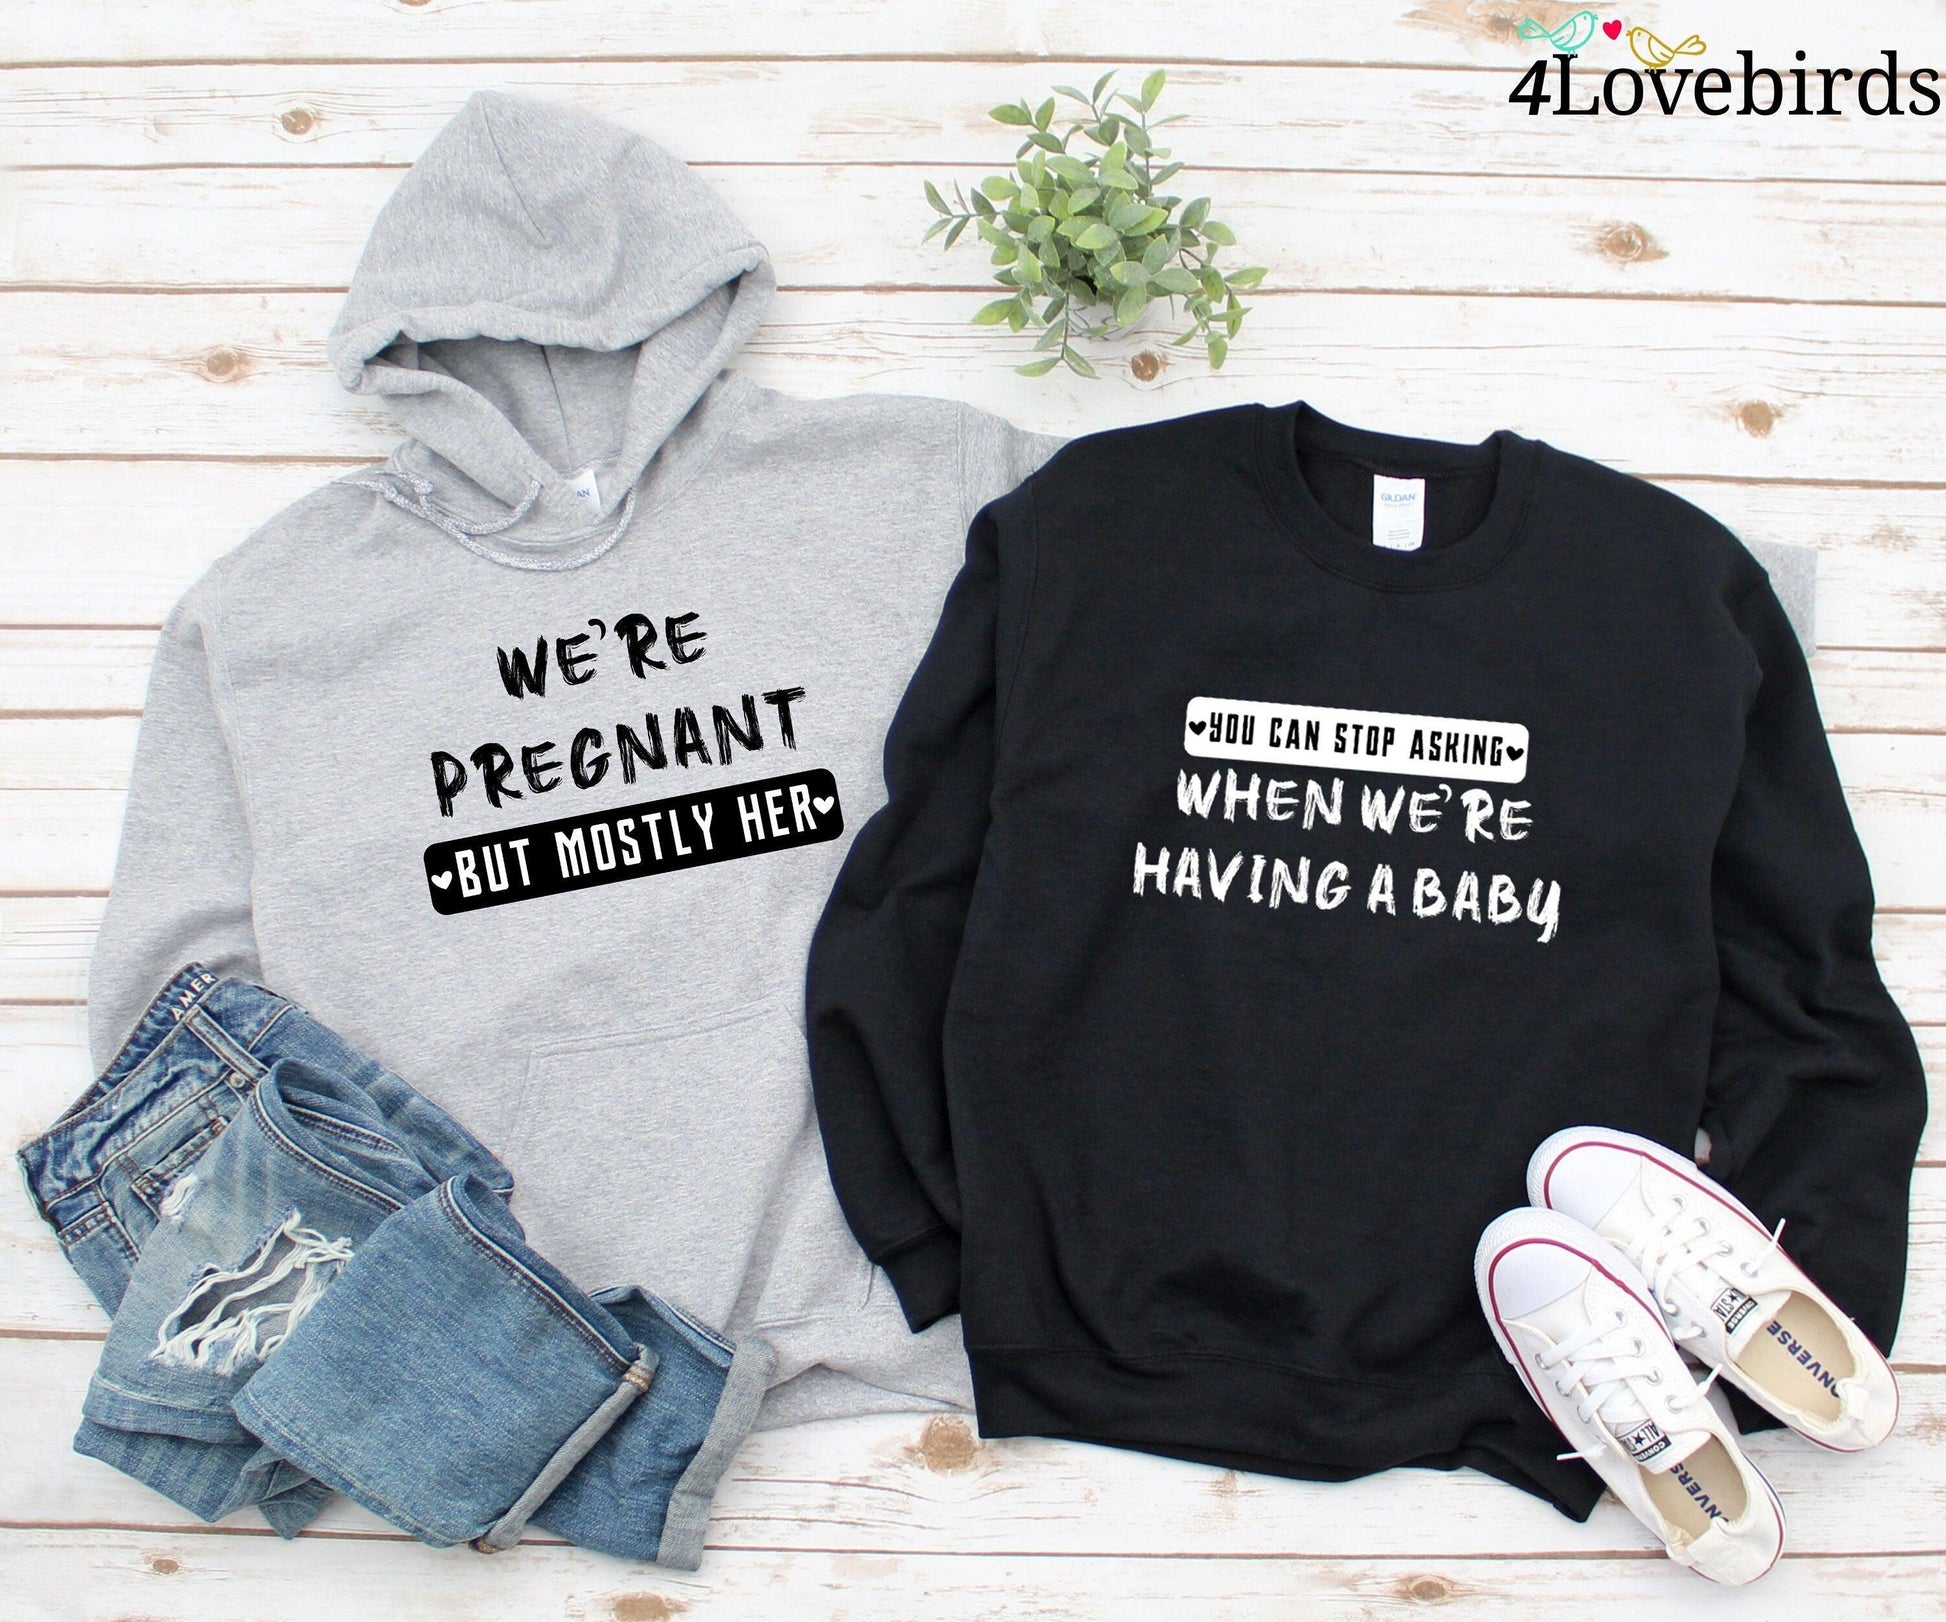 You Can Stop Asking When We're Having A Baby/We're Pregnant But Mostly Her T-Shirt, Parents Gifts, Parents Hoodies, Mom & Dad Sweatshirts - 4Lovebirds